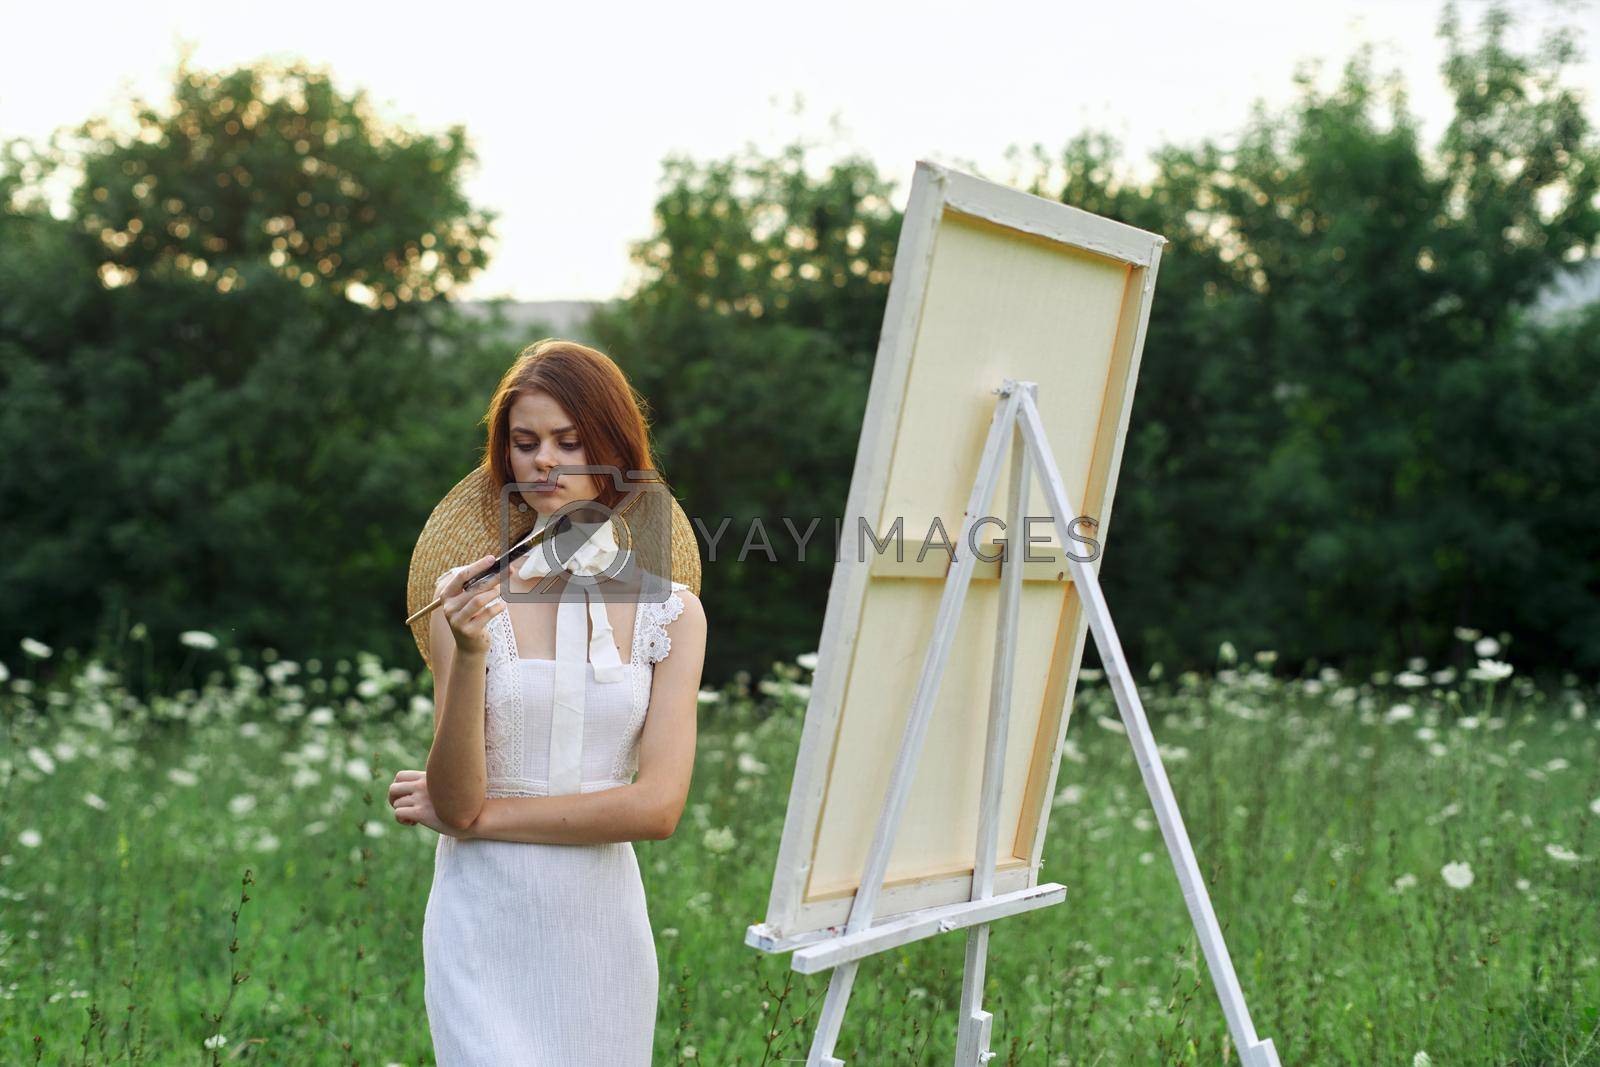 Royalty free image of woman artist outdoors landscape creative hobby lifestyle by Vichizh